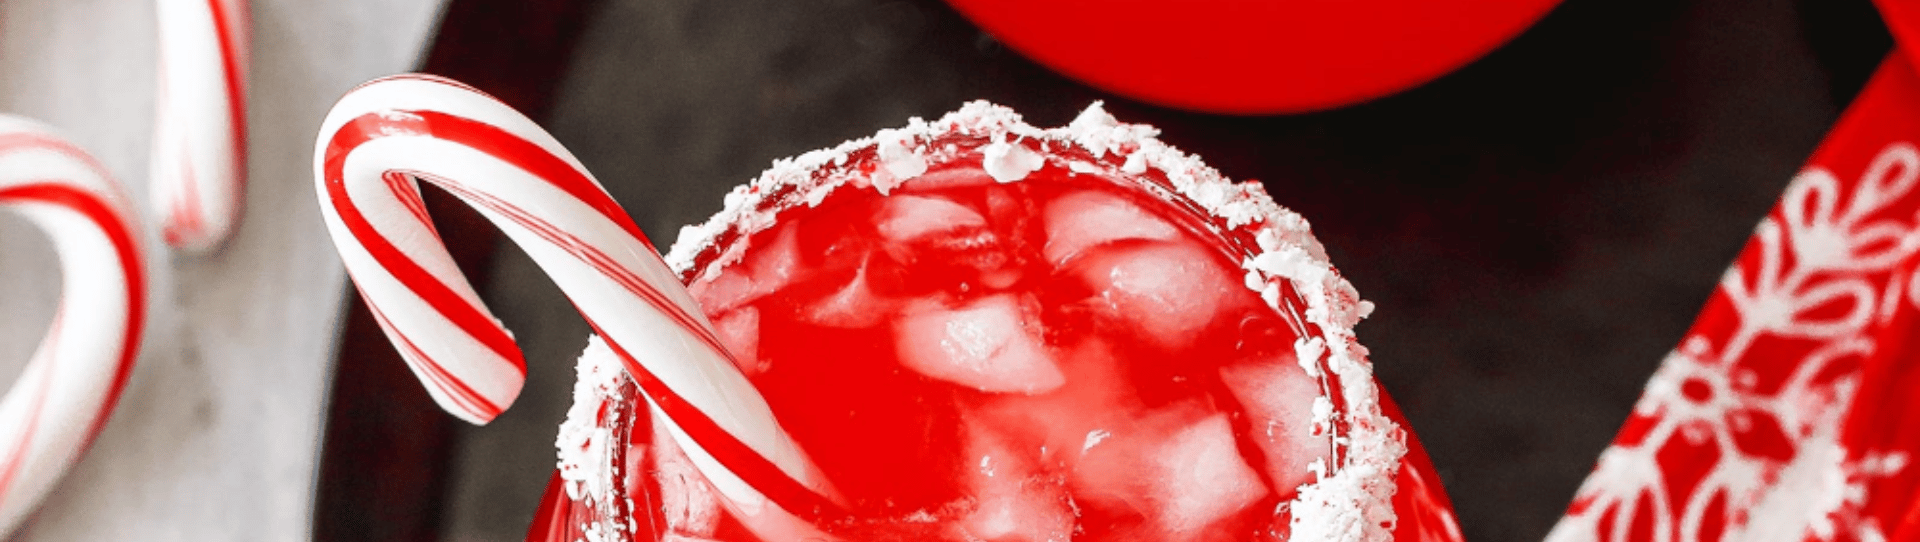 Sophisticated Sipping: Candy Cane Vodka Cocktail